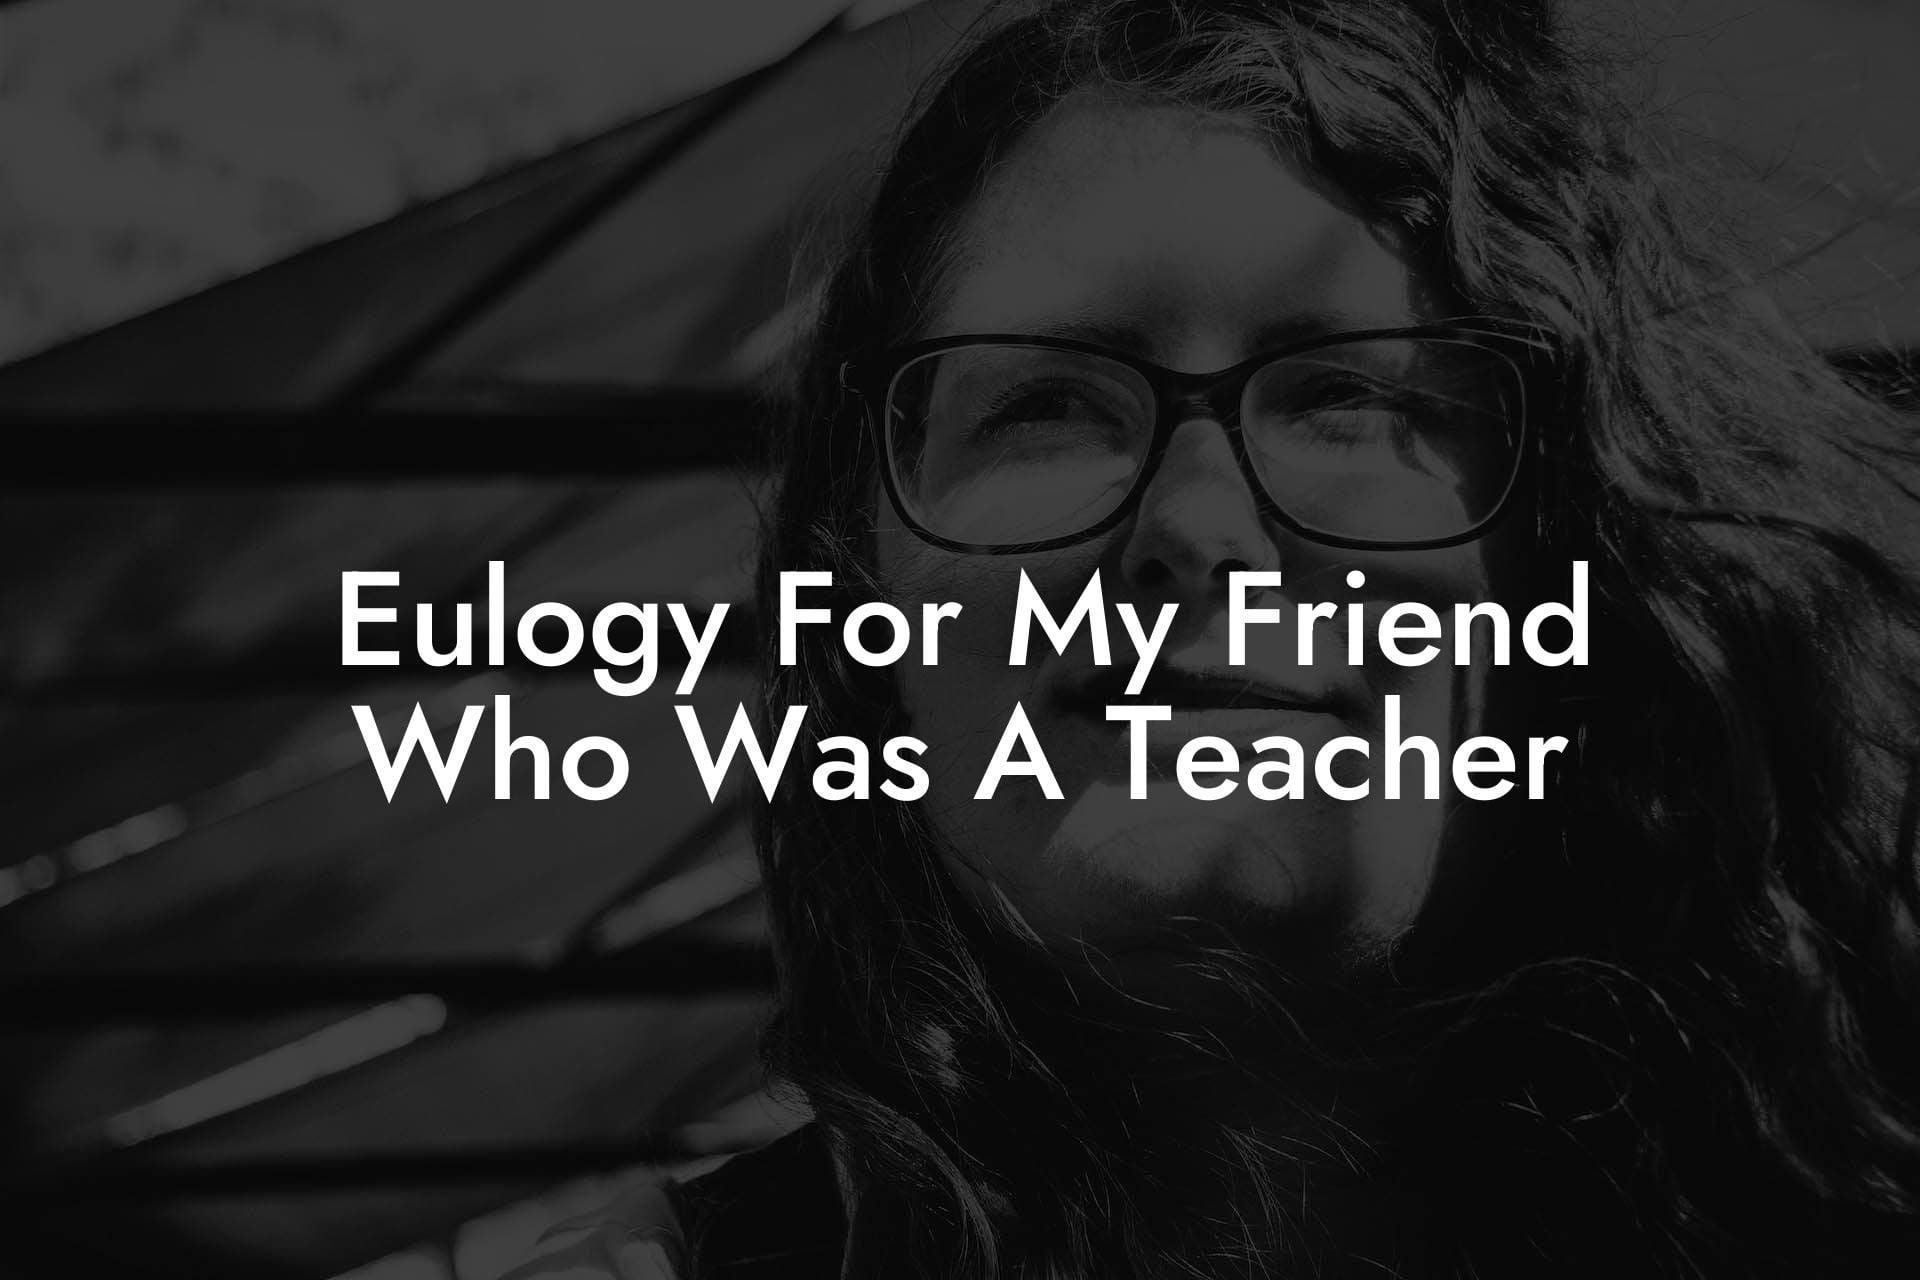 Eulogy For My Friend Who Was A Teacher